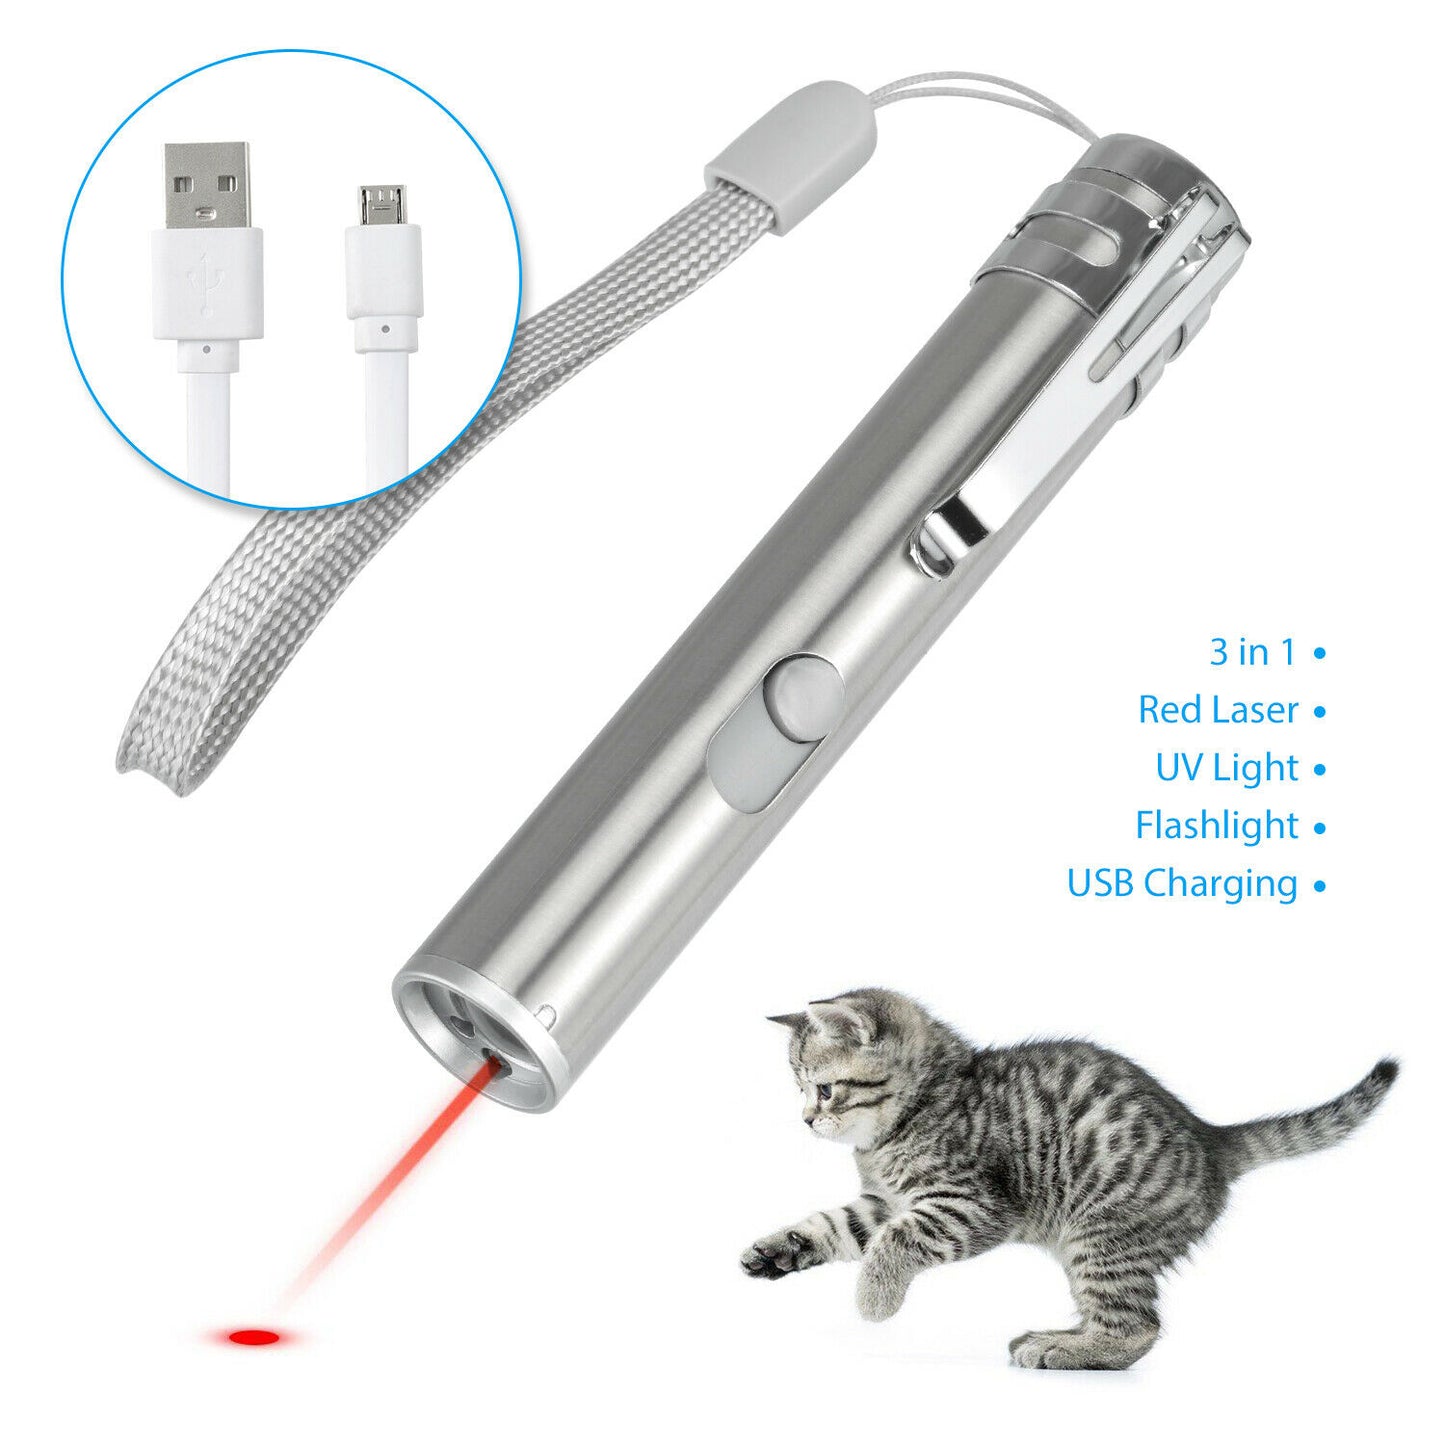 3 in 1 Cat Pet Toy Rechargeable Red UV Flashlight for Cat Dog Pet Toy Flashlight